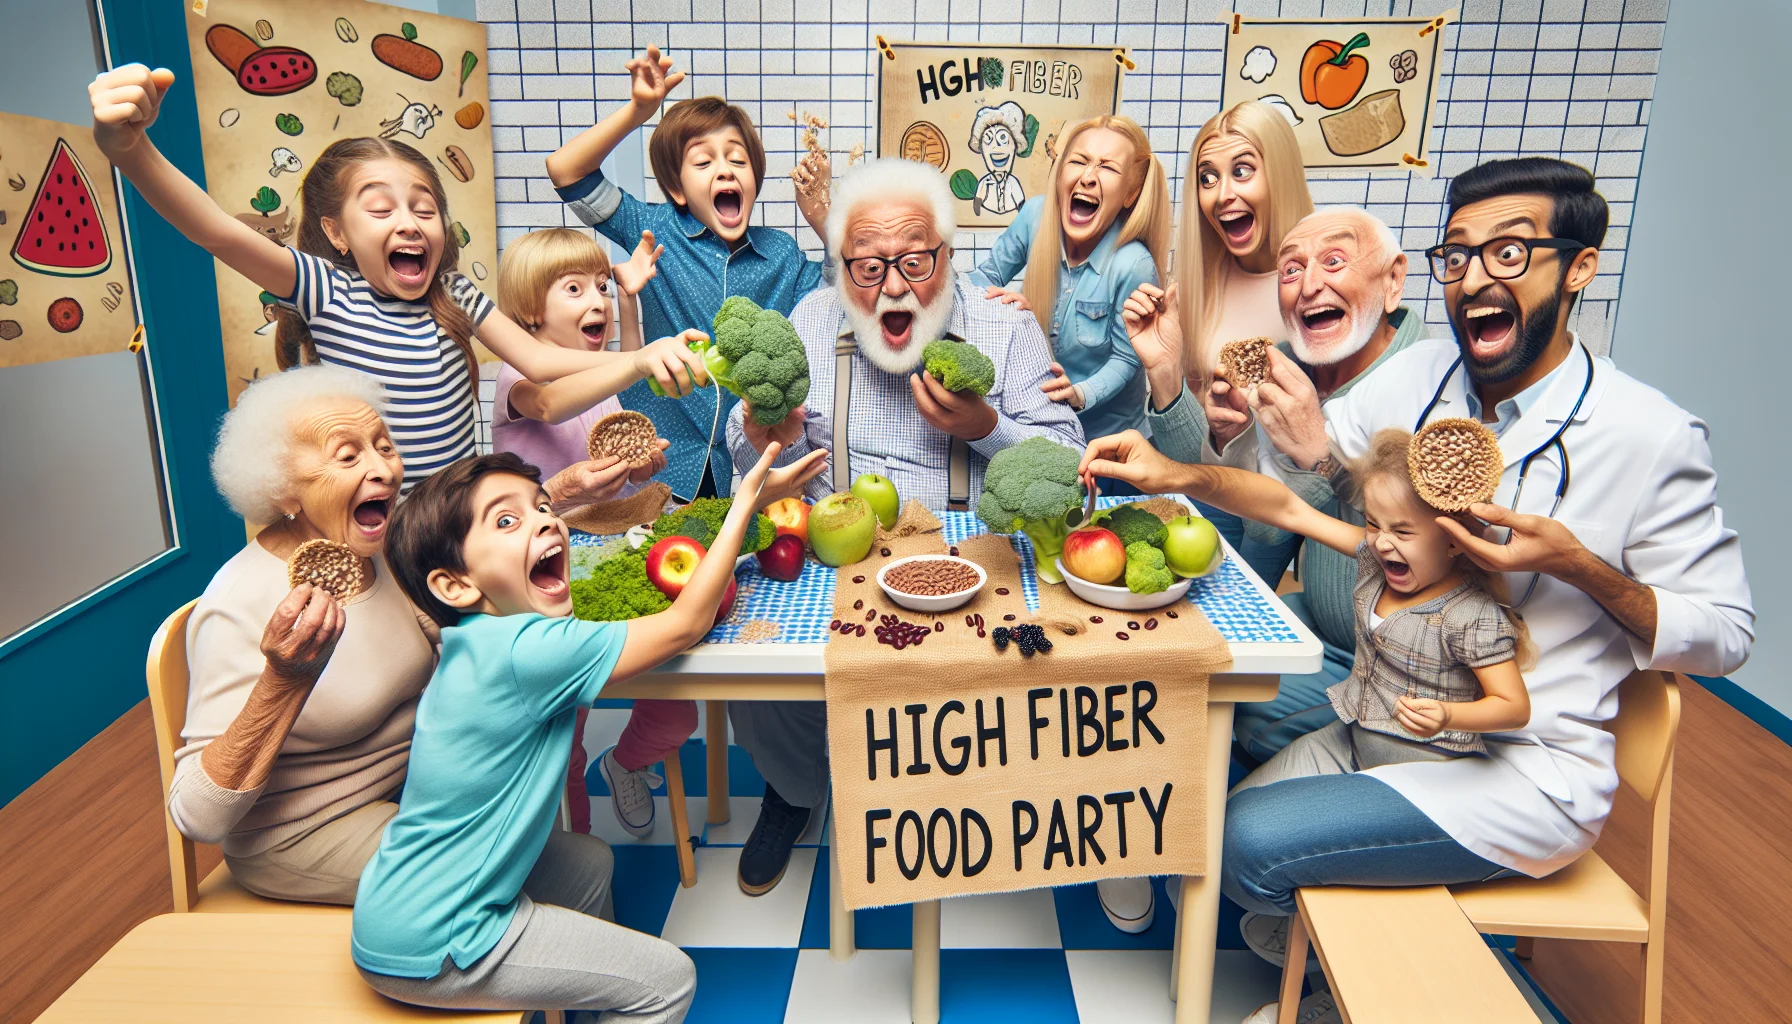 Create a humorous image taking place in a lively wellness center where young kids and elderly people of several descents including Caucasian, Hispanic, and Middle-Eastern are joyfully participating in a 'High Fiber Food Party'. This fun-filled scene includes kids playfully feeding the elderly with high-fiber foods such as broccoli, apples, beans, and whole grains. The older participants are showing exaggerated expressions of surprise and delight, while kids are giggling. There's a visible poster in the backdrop with humorous illustrations and quotes about healthy eating and high fiber diets.